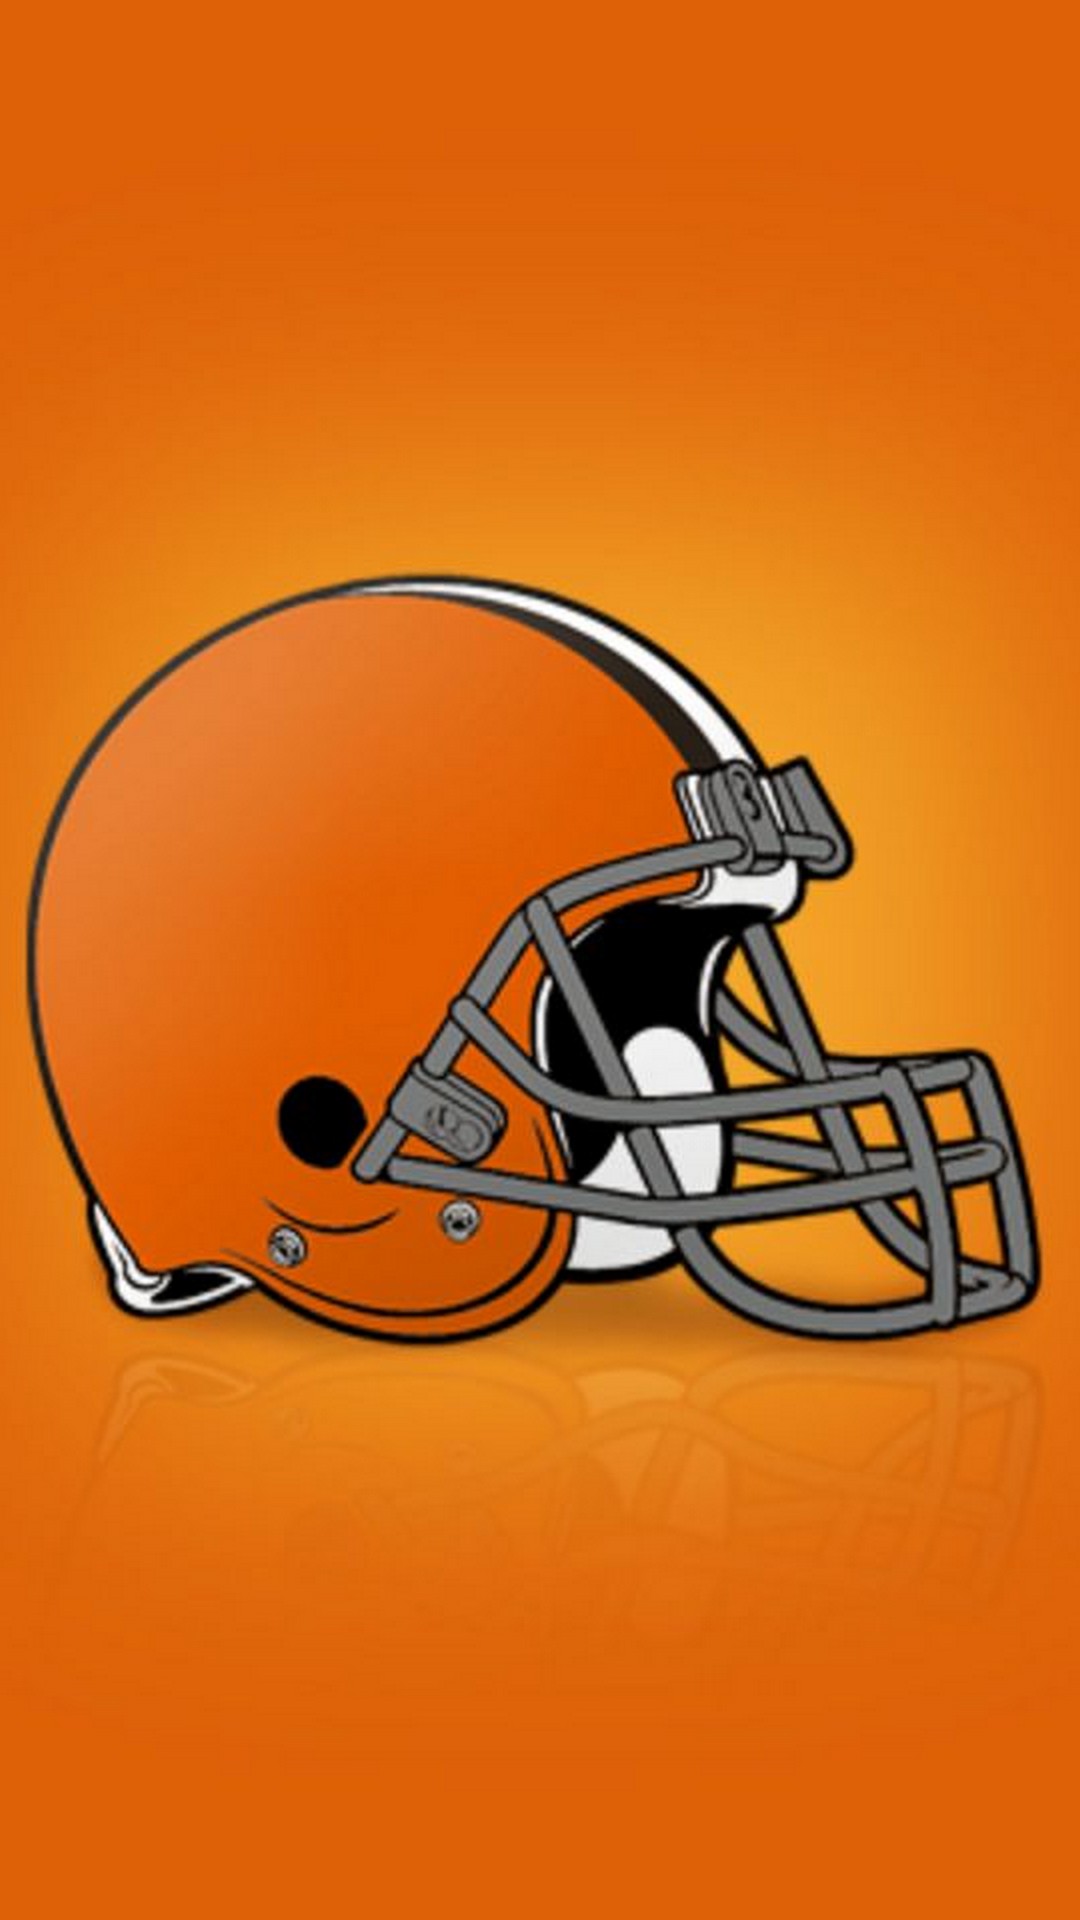 Cleveland Browns iPhone Wallpaper in HD With high-resolution 1080X1920 pixel. Download and set as wallpaper for Apple iPhone X, XS Max, XR, 8, 7, 6, SE, iPad, Android